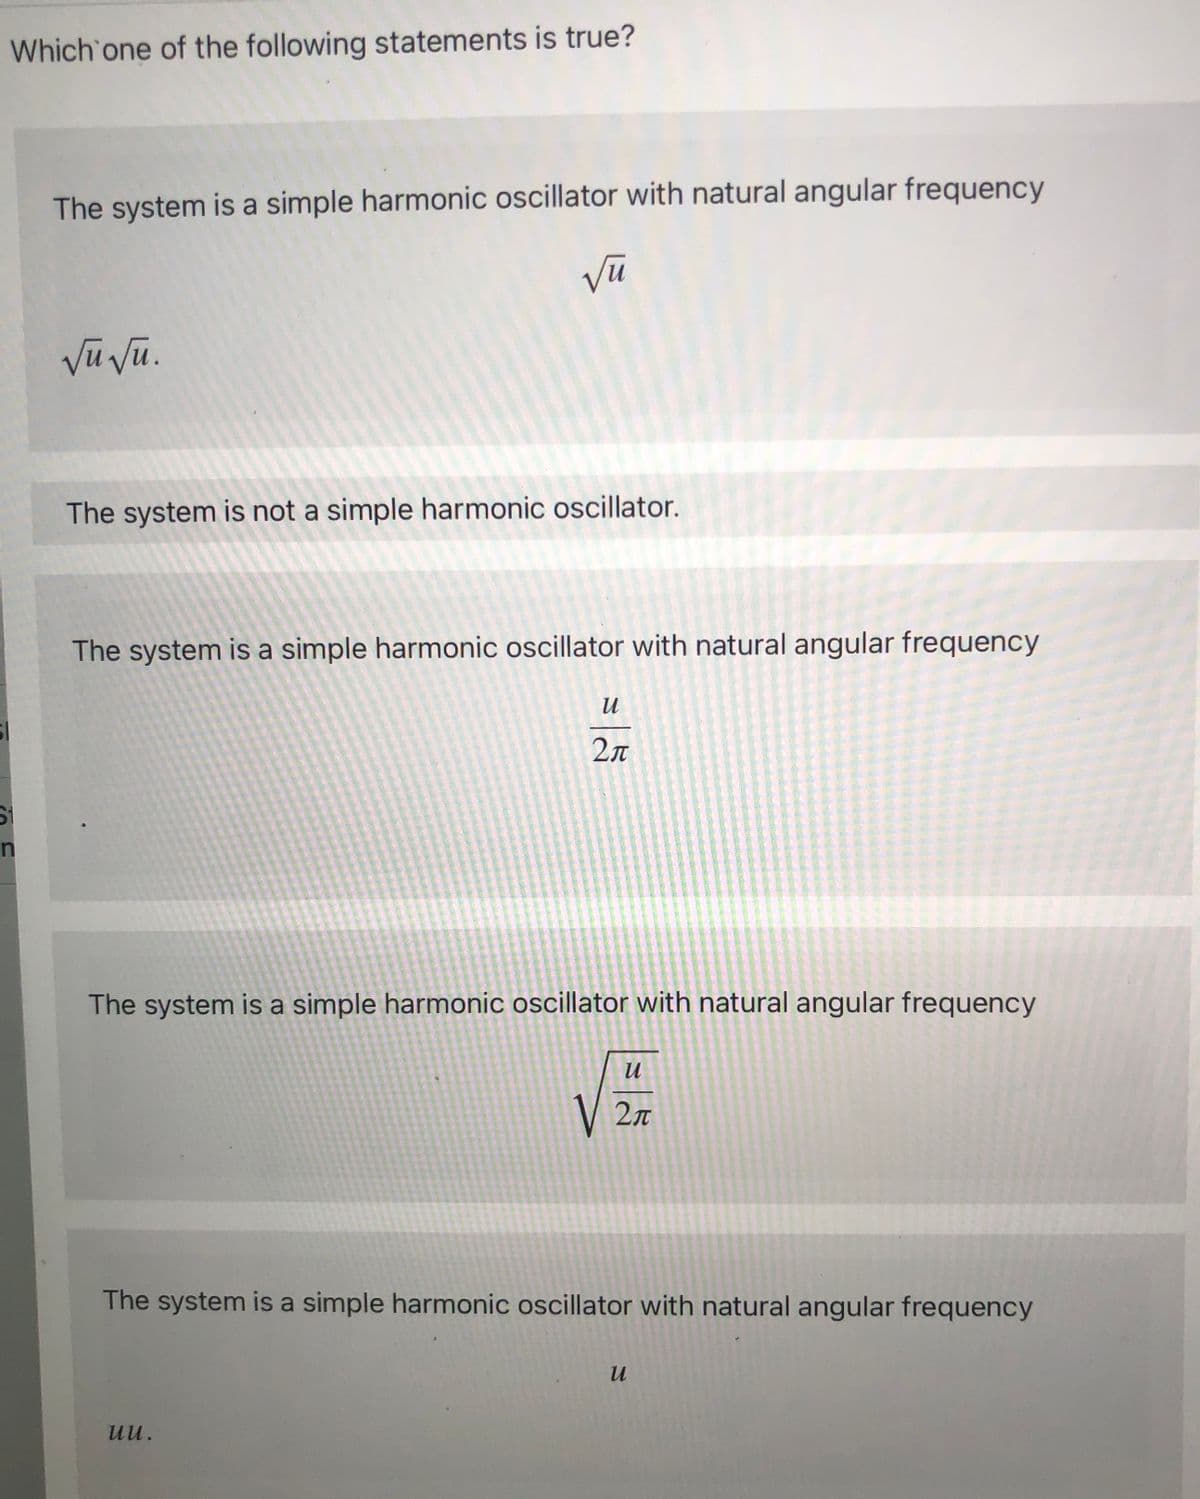 Which one of the following statements is true?
The system is a simple harmonic oscillator with natural angular frequency
Vũ vũ.
The system is not a simple harmonic oscillator.
The system is a simple harmonic oscillator with natural angular frequency
2л
The system is a simple harmonic oscillator with natural angular frequency
V
V 2n
The system is a simple harmonic oscillator with natural angular frequency
uu.
